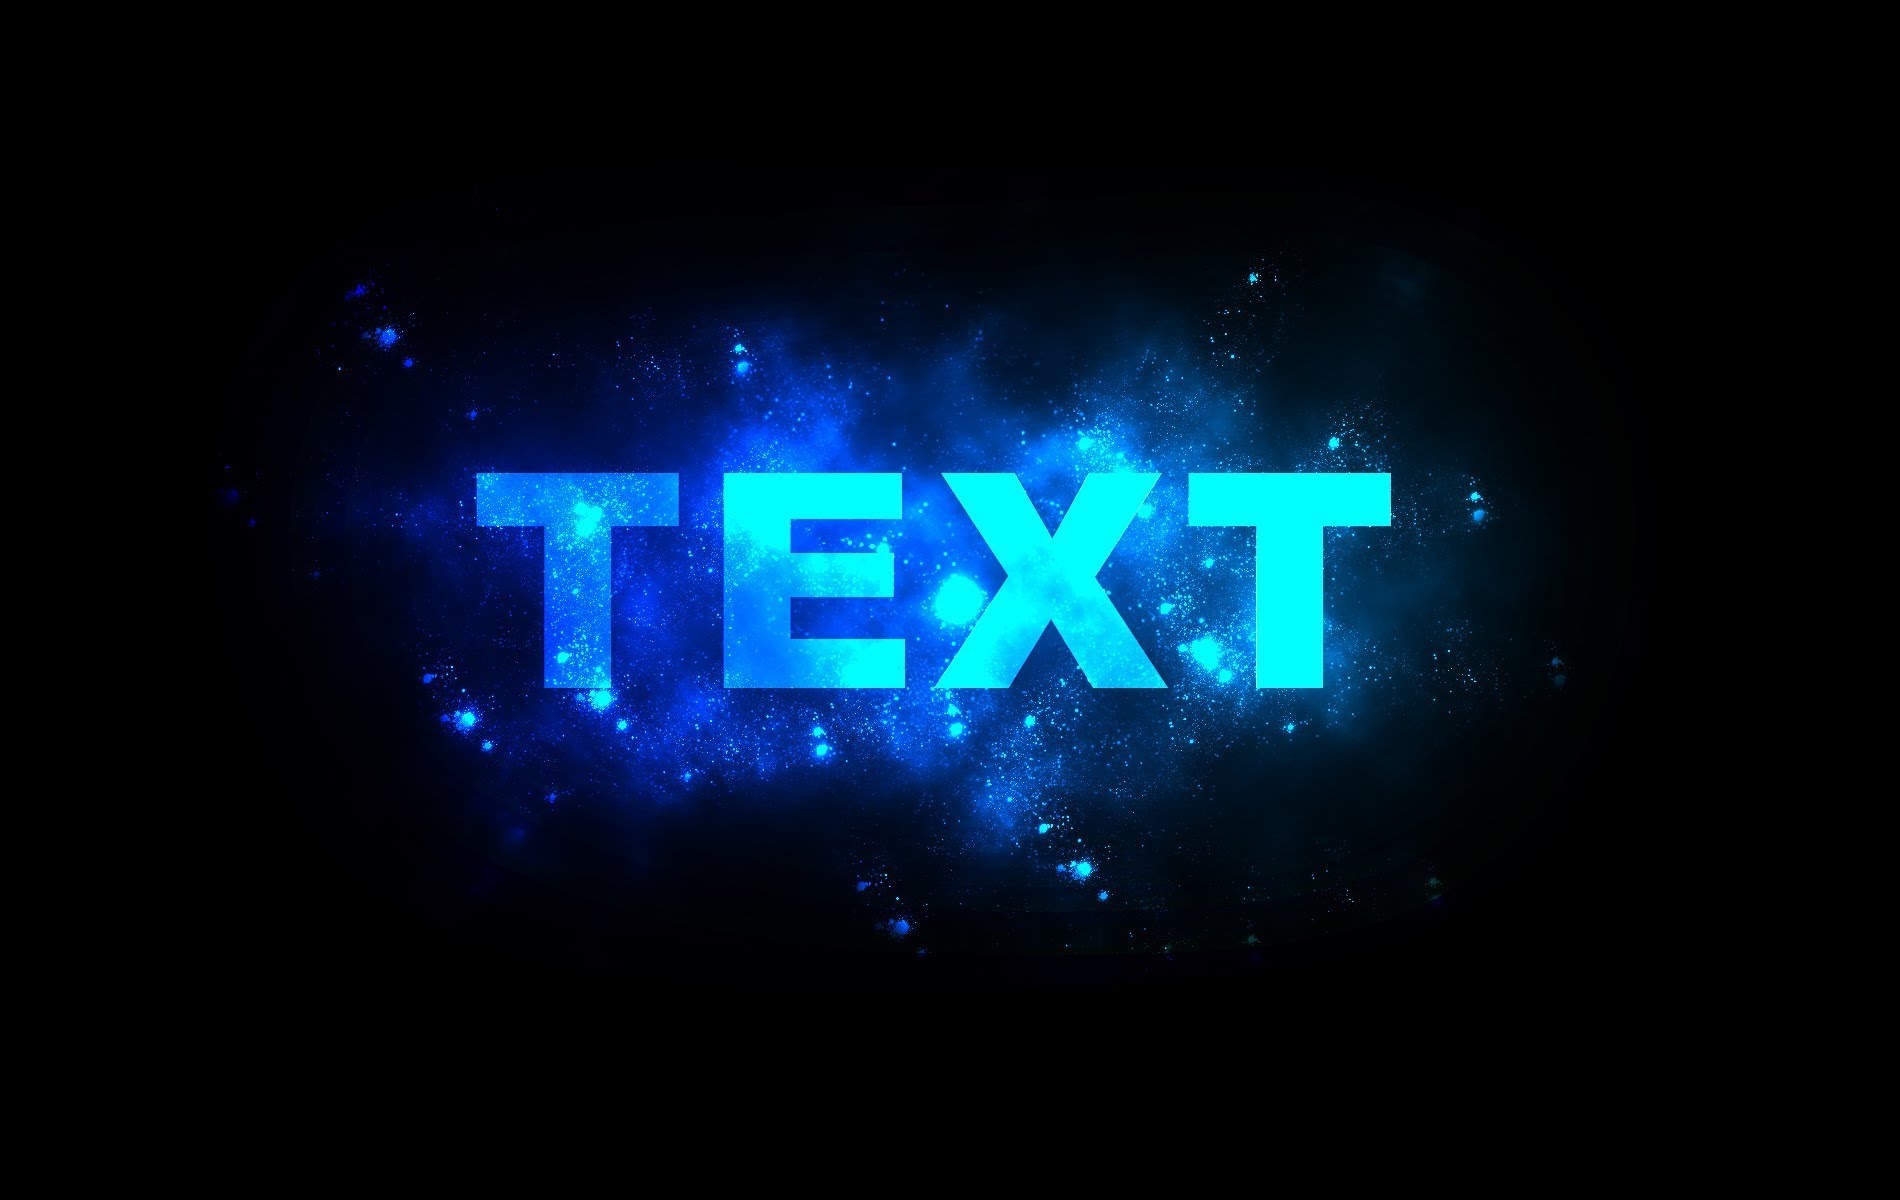 How to Create Glowing Text in Photoshop